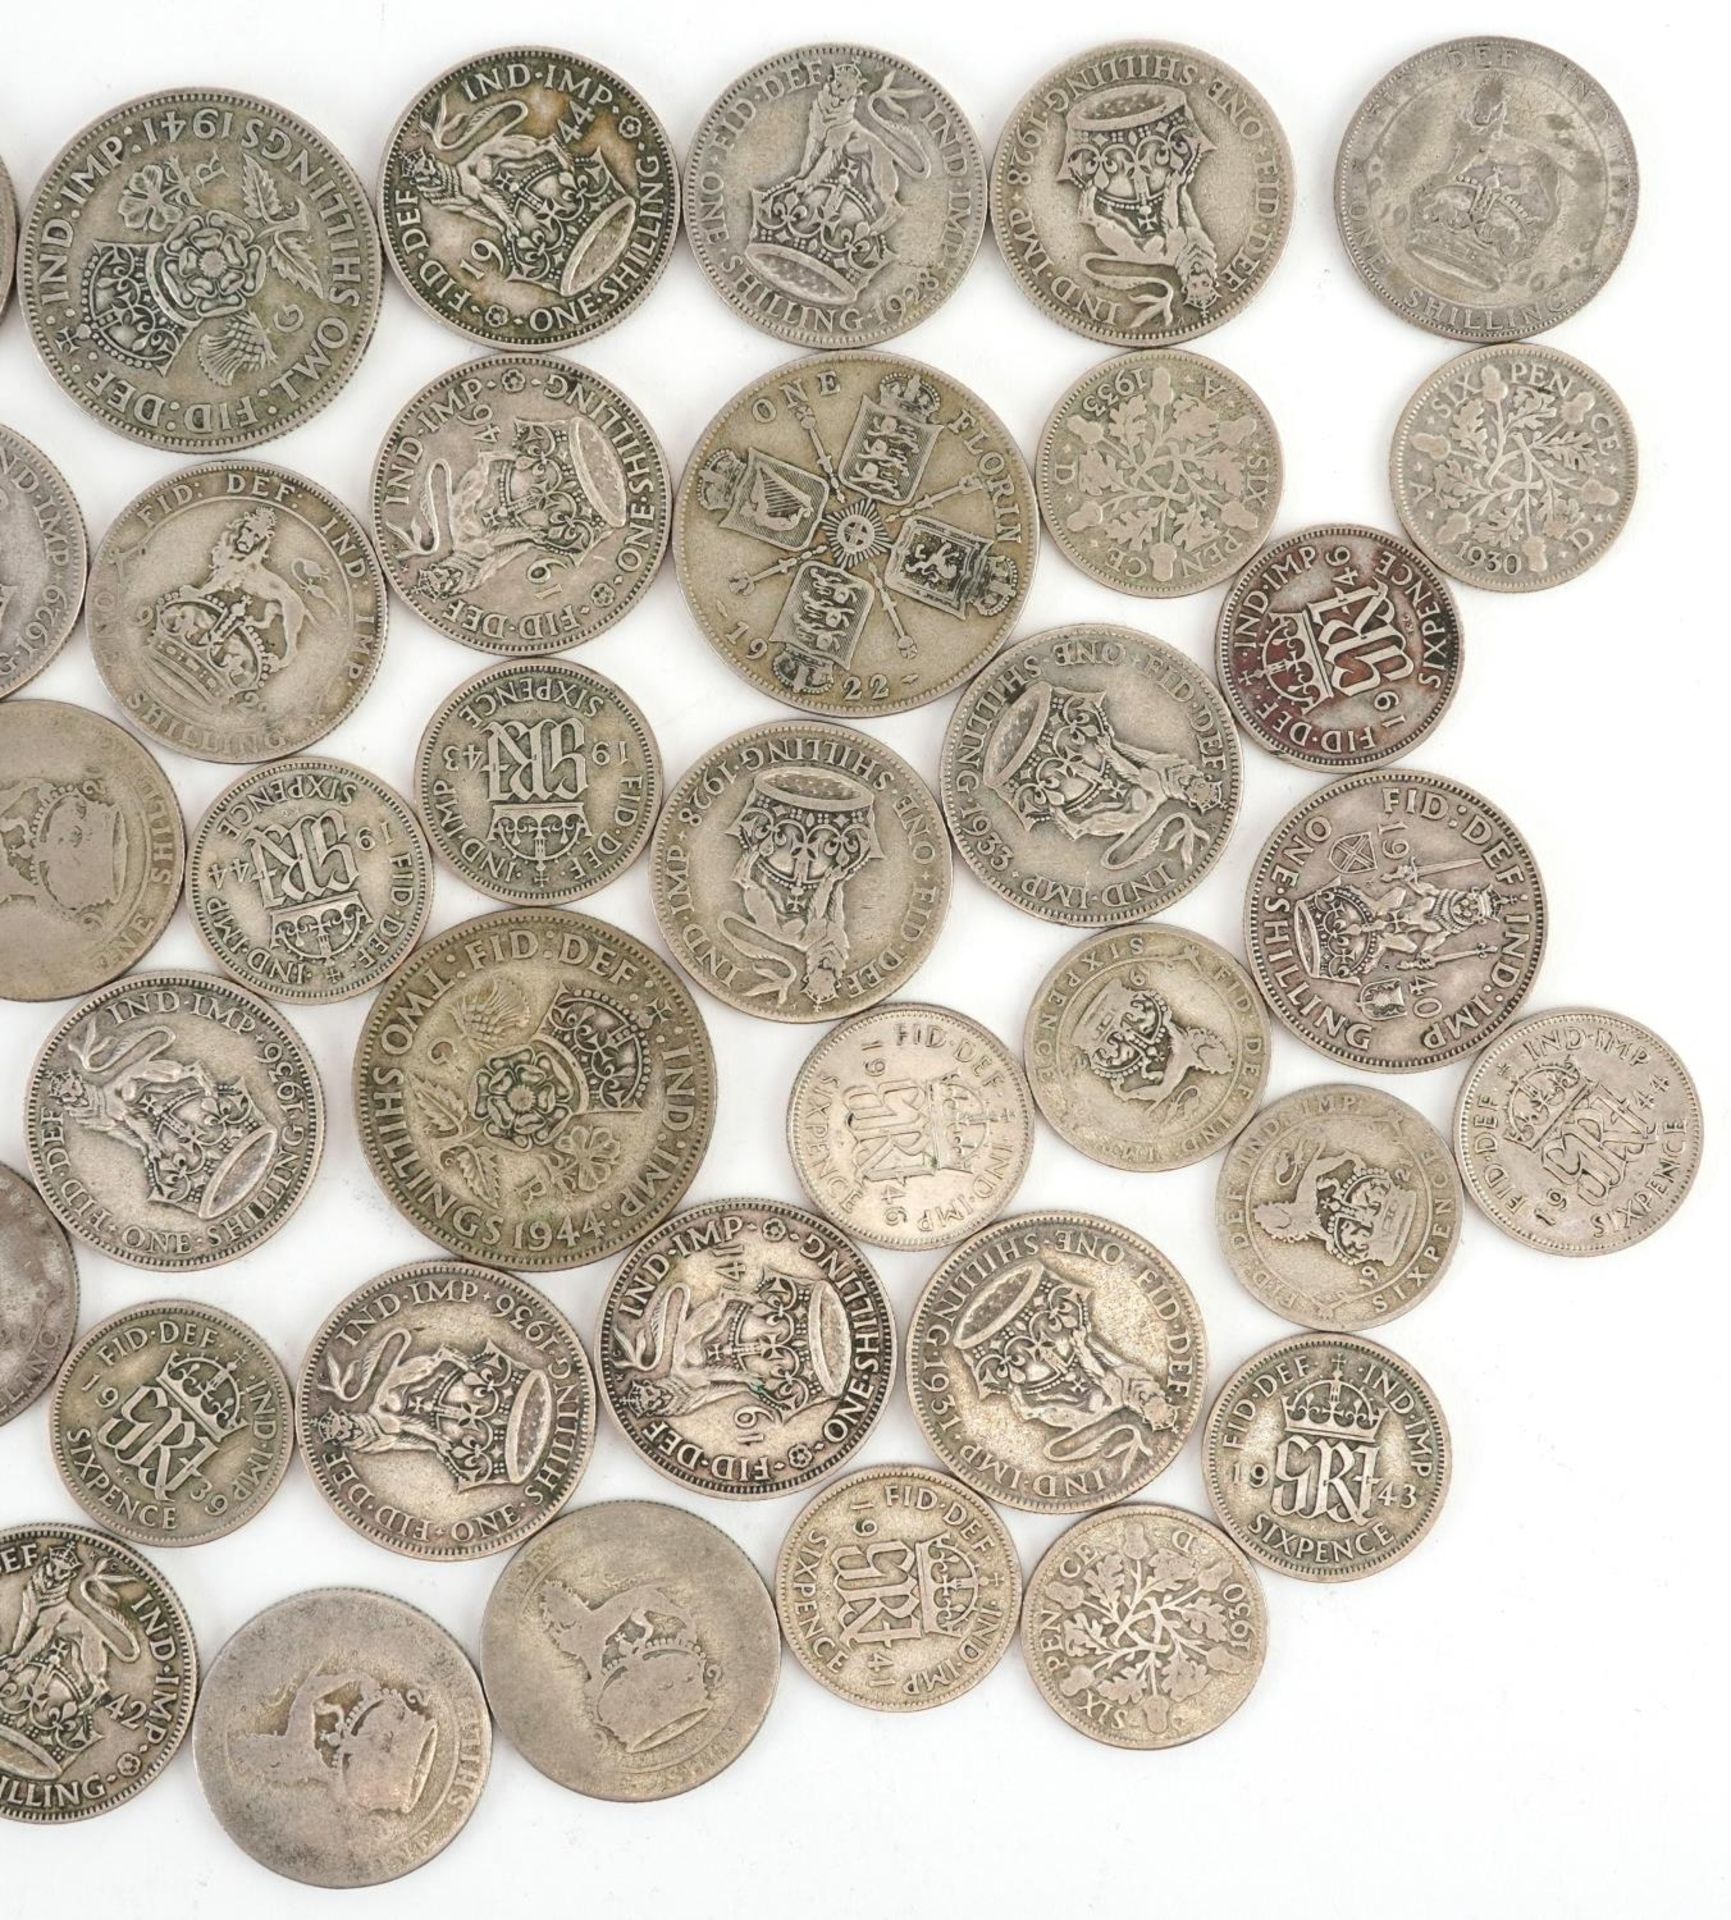 British pre decimal, pre 1947 coinage including florin and shillings, 255g - Image 3 of 6